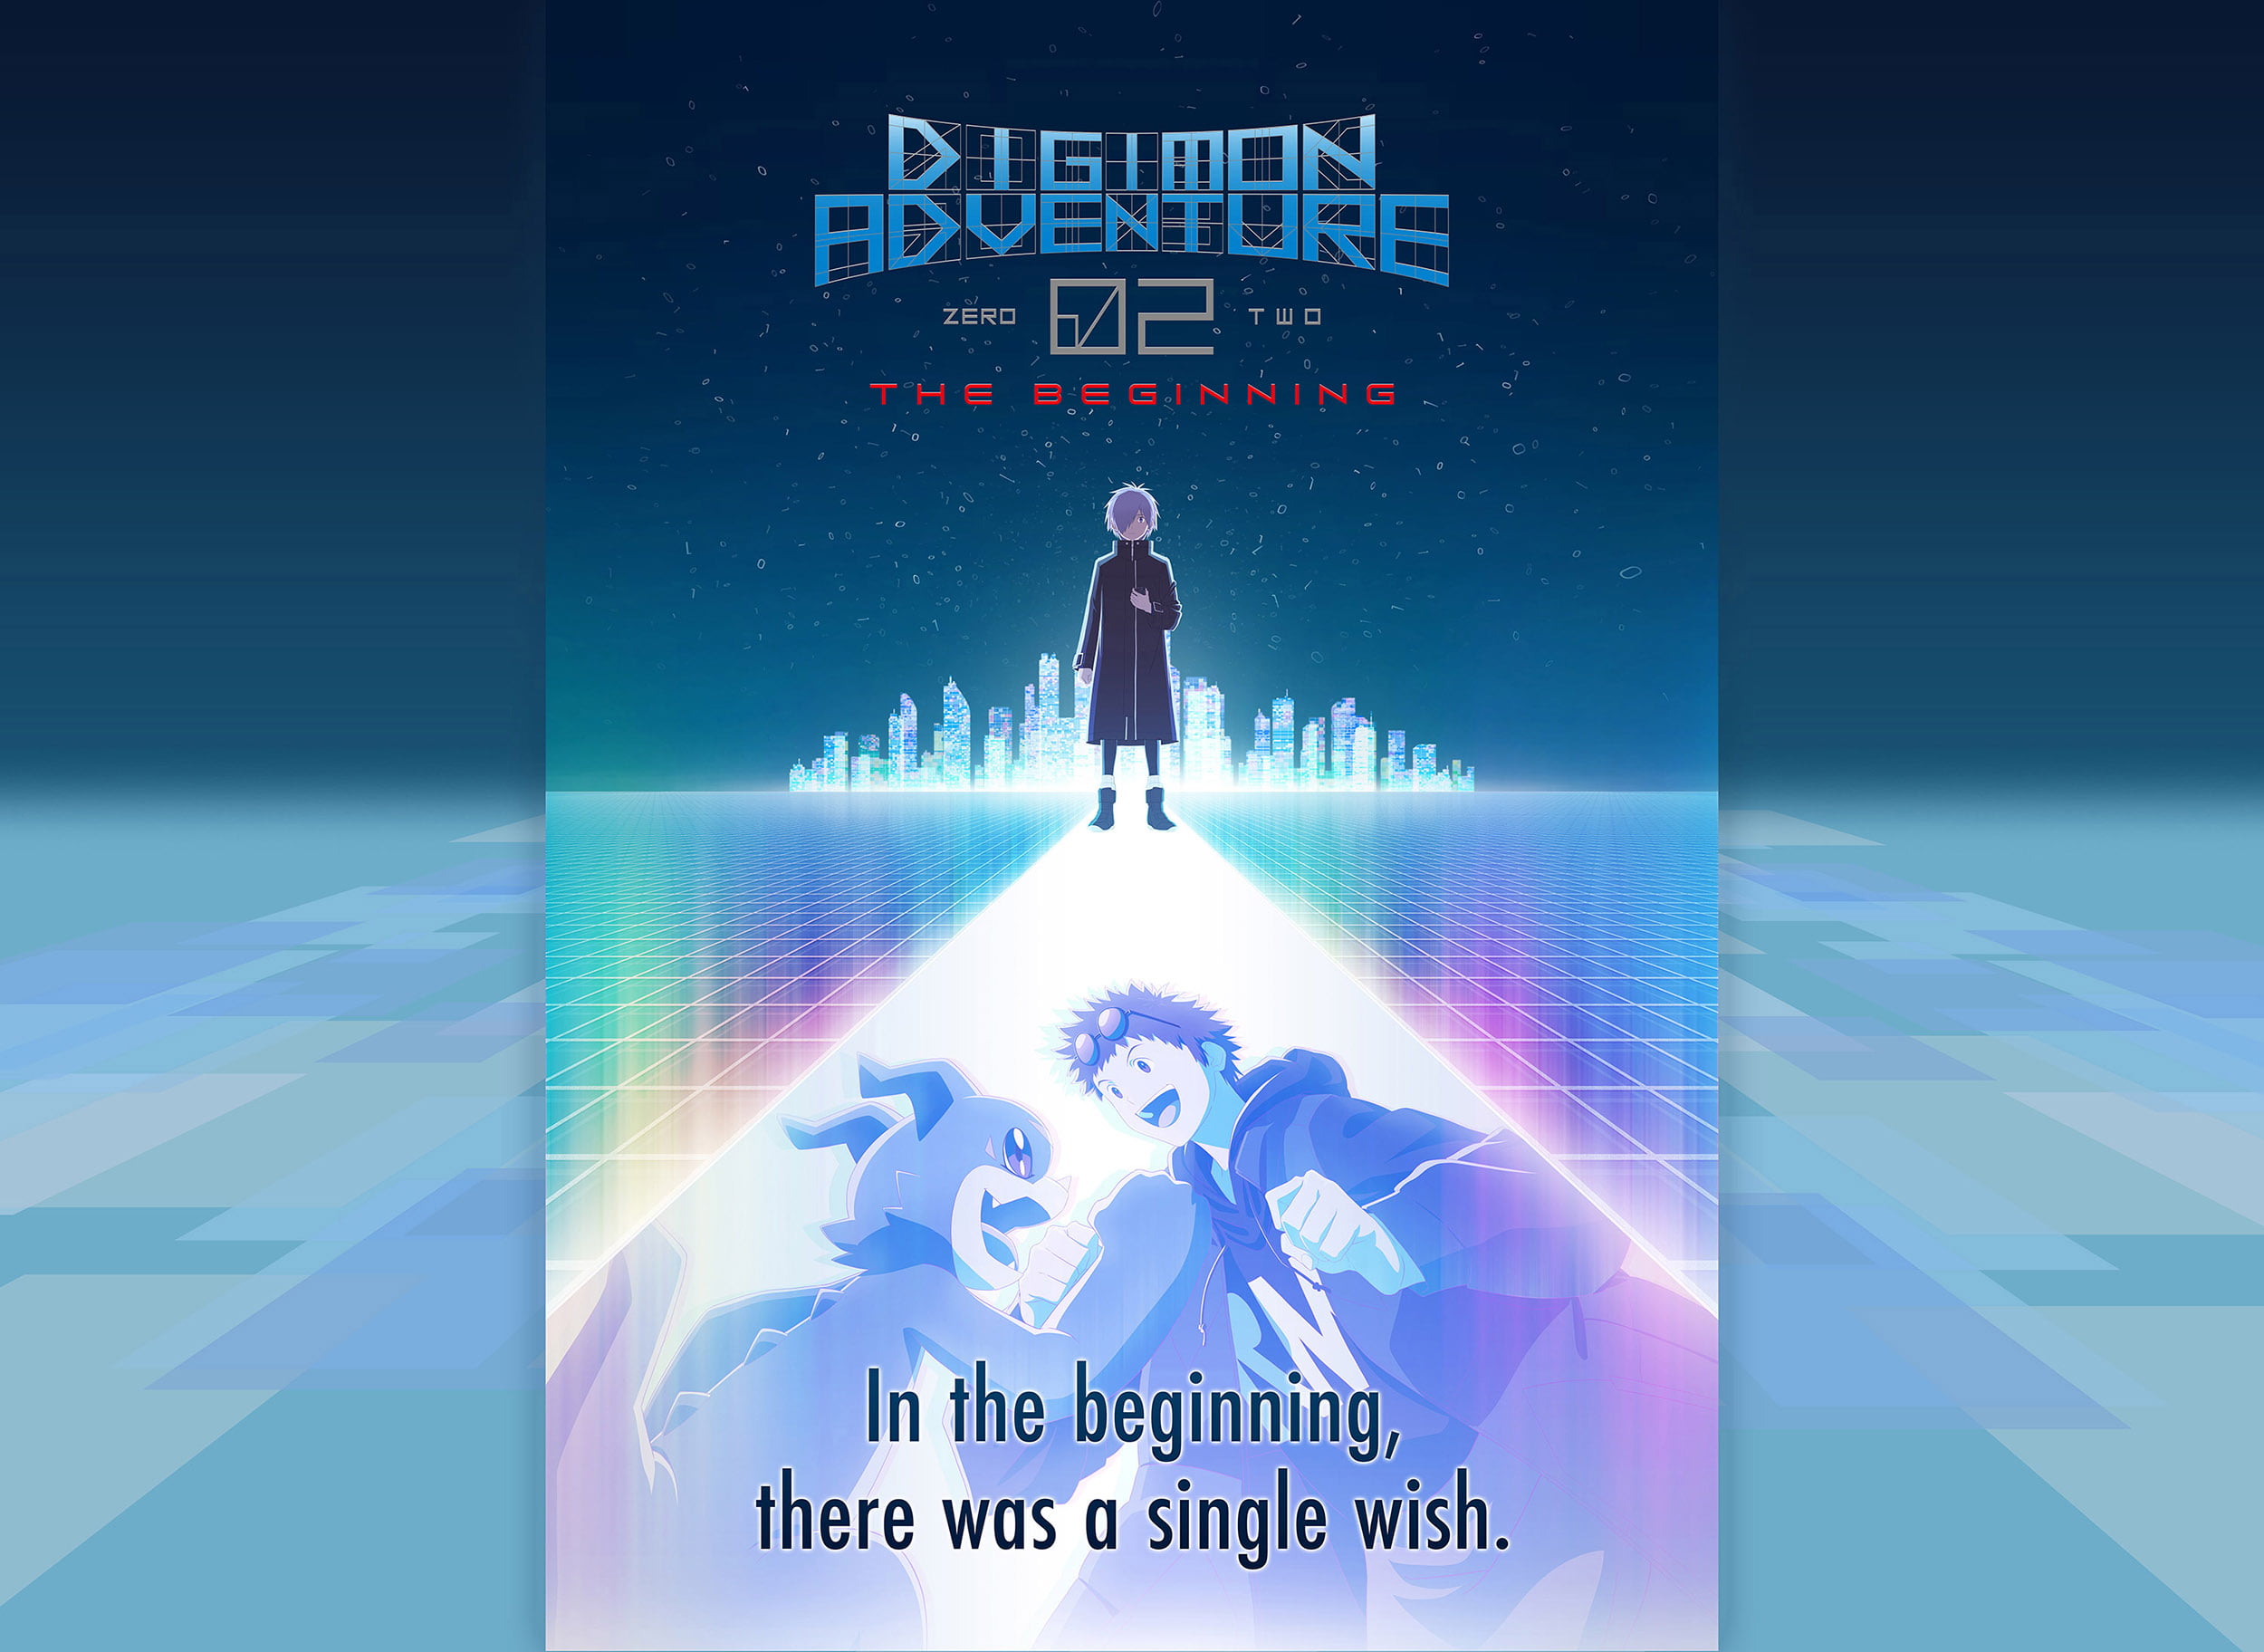 「Digimon Adventure 02 THE BEGINNING」Official website. In the beginning, there was a single wish.